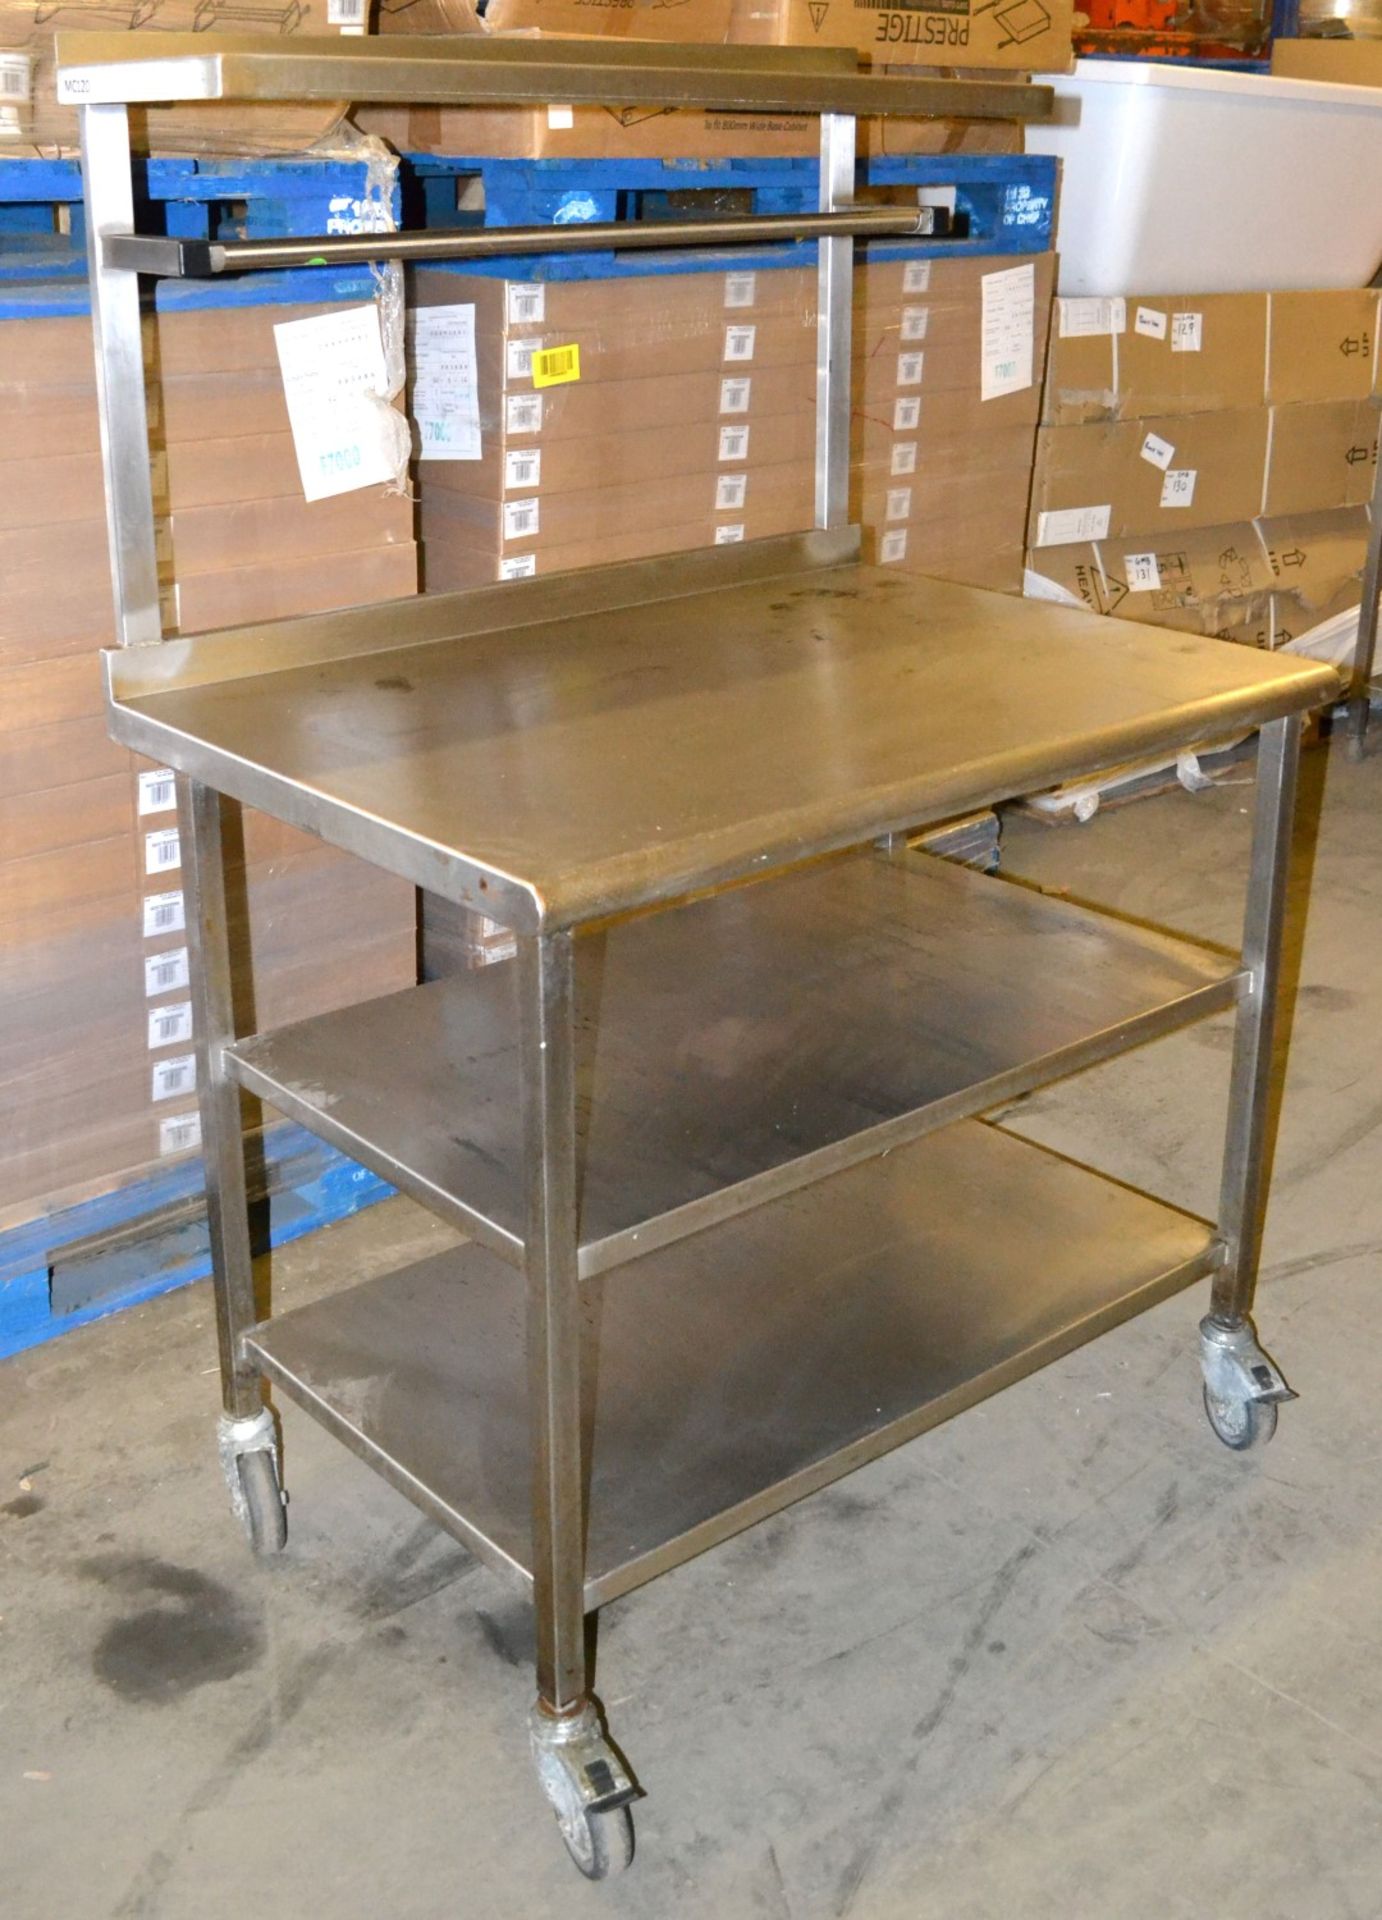 1 x Wheeled Stainless Steel Prep Table - Dimensions: 100 x 69.5 x 148cm - Ref: MC120 - CL282 - Locat - Image 10 of 11